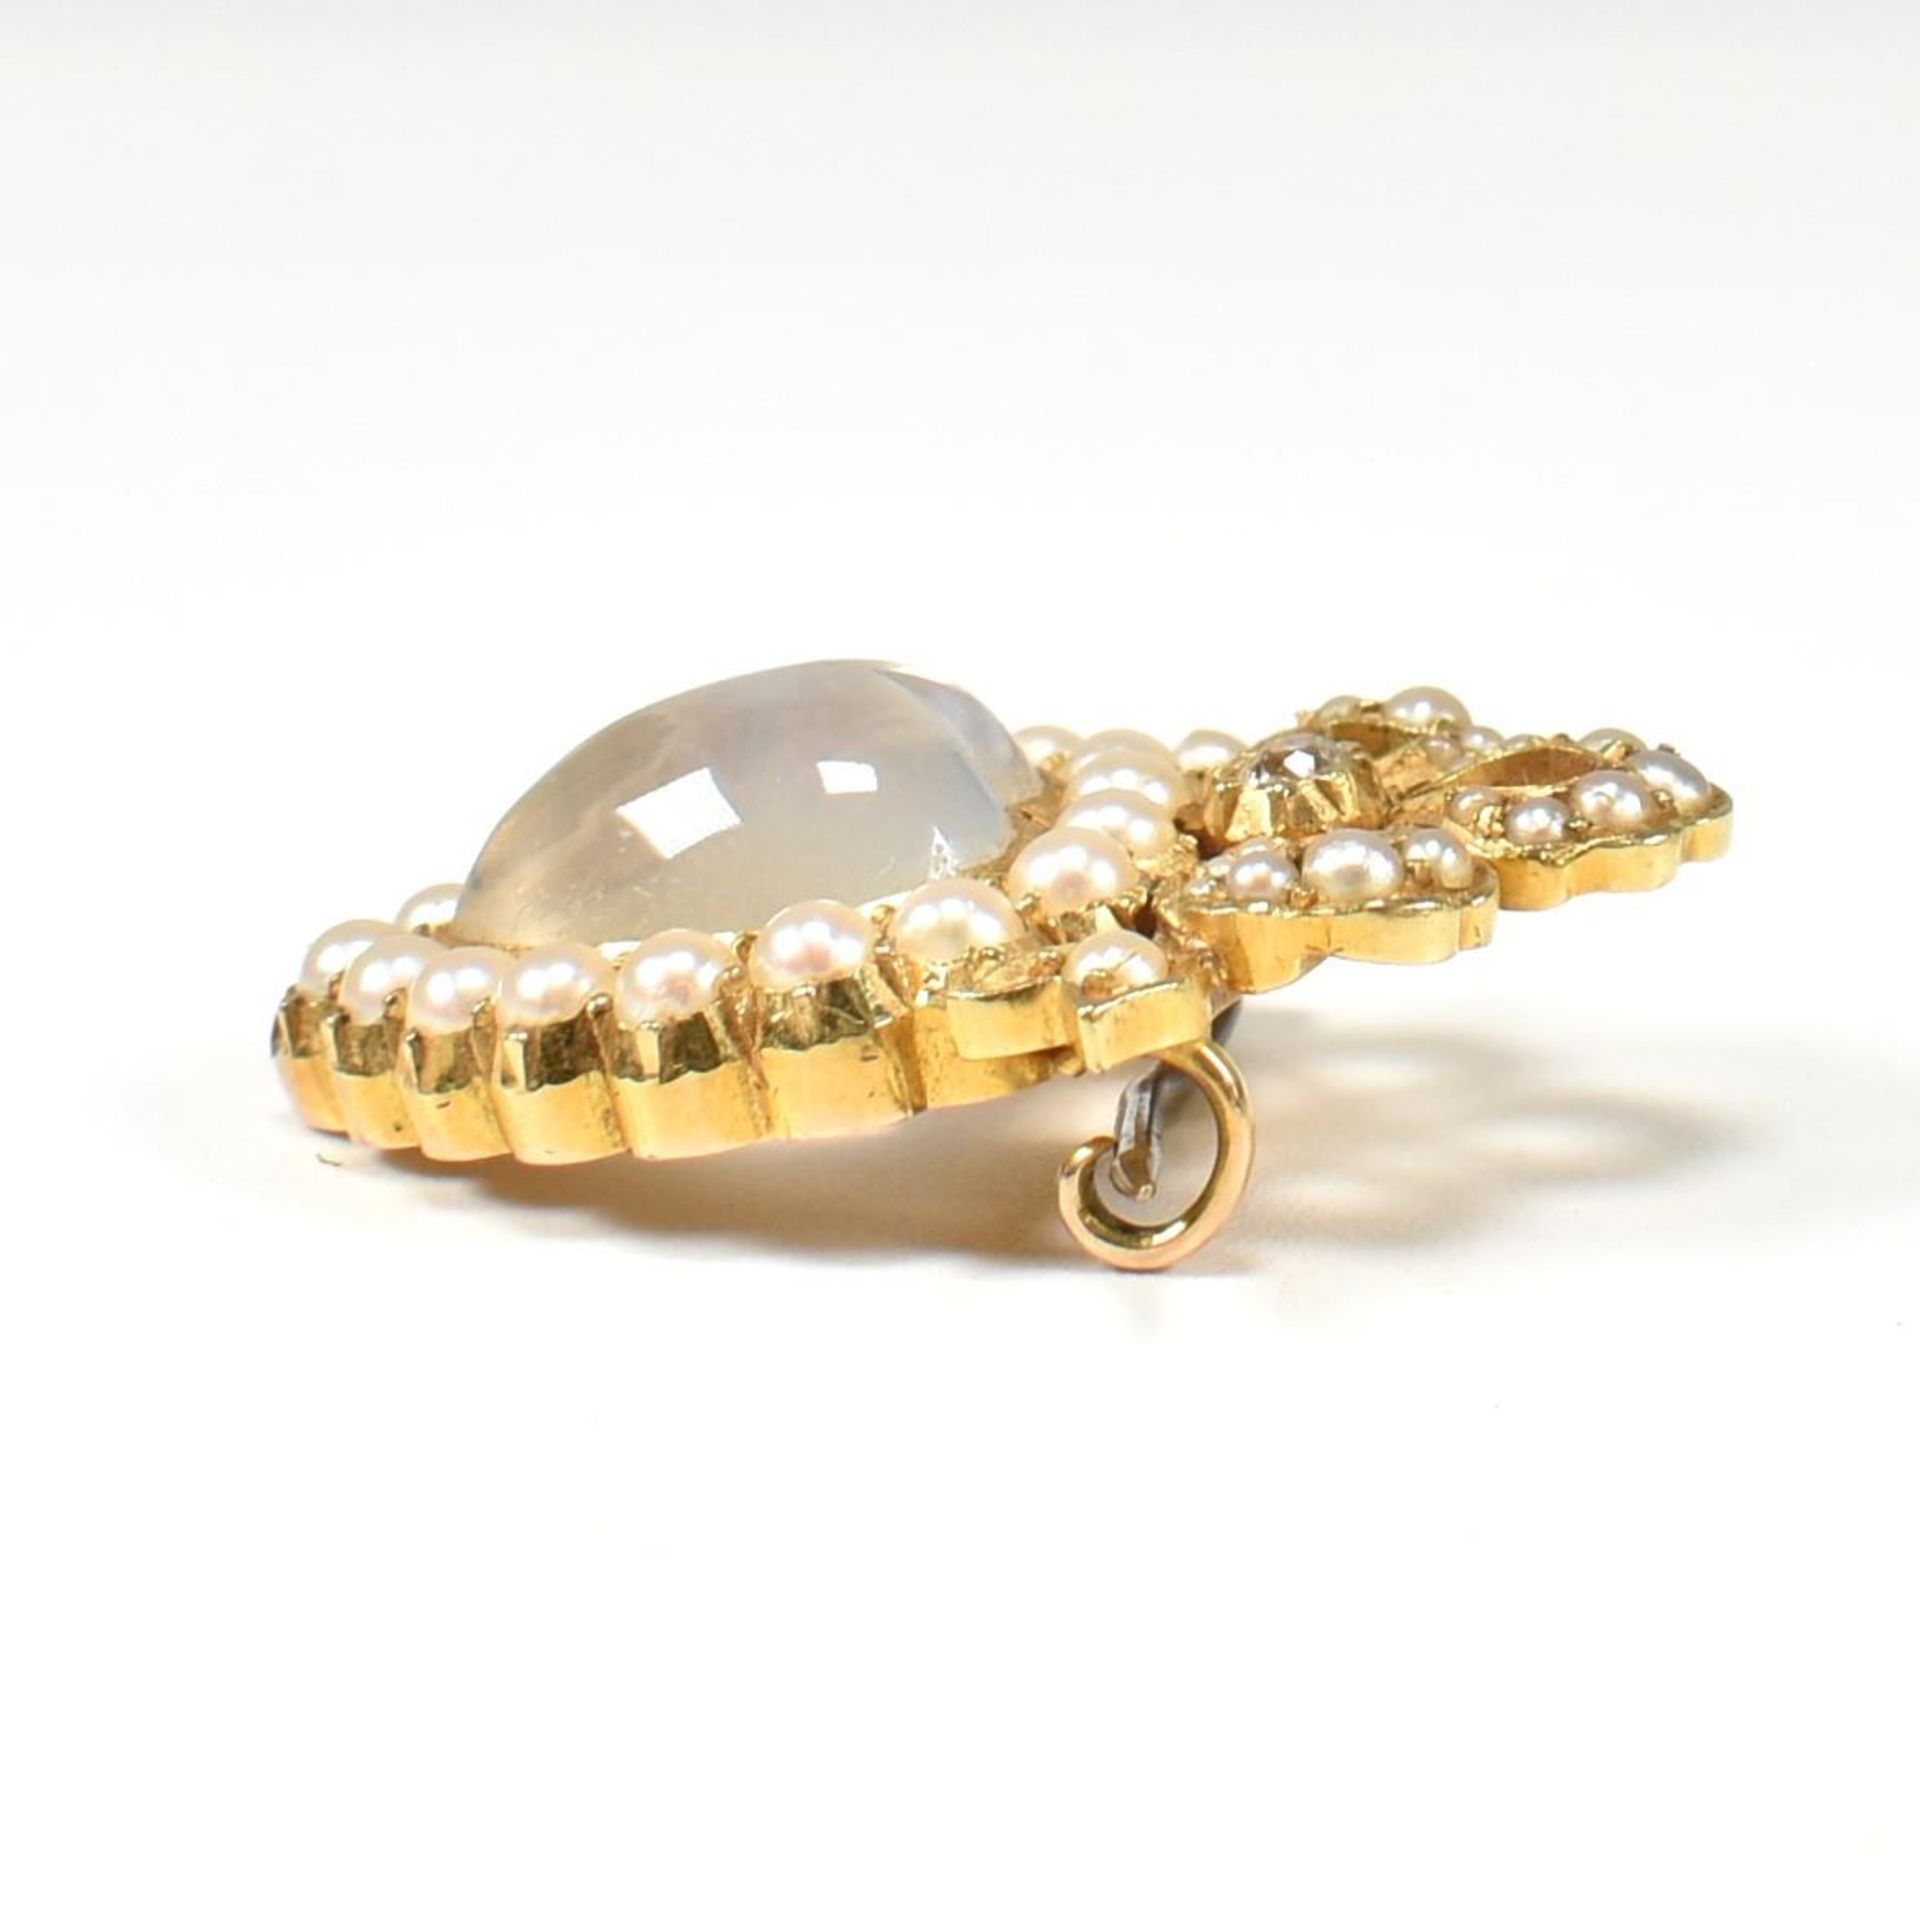 19TH CENTURY GOLD MOONSTONE & PEARL HEART BROOCH PIN - Image 5 of 7